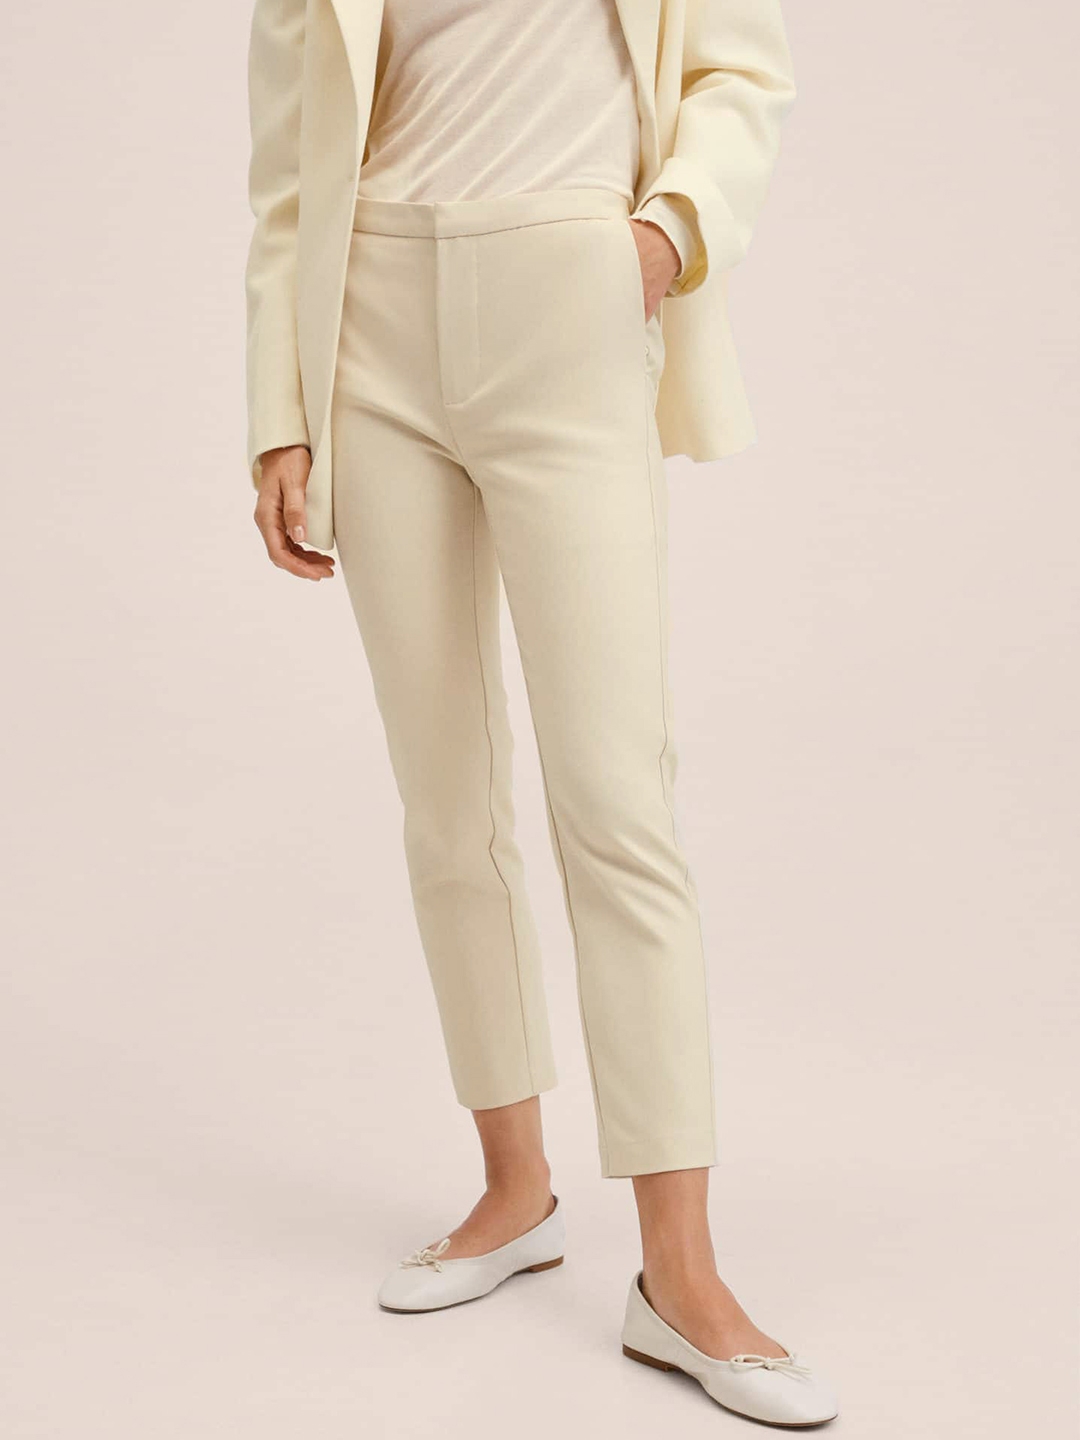 Buy MANGO Women Cream Coloured Solid Trousers -  - Apparel for Women